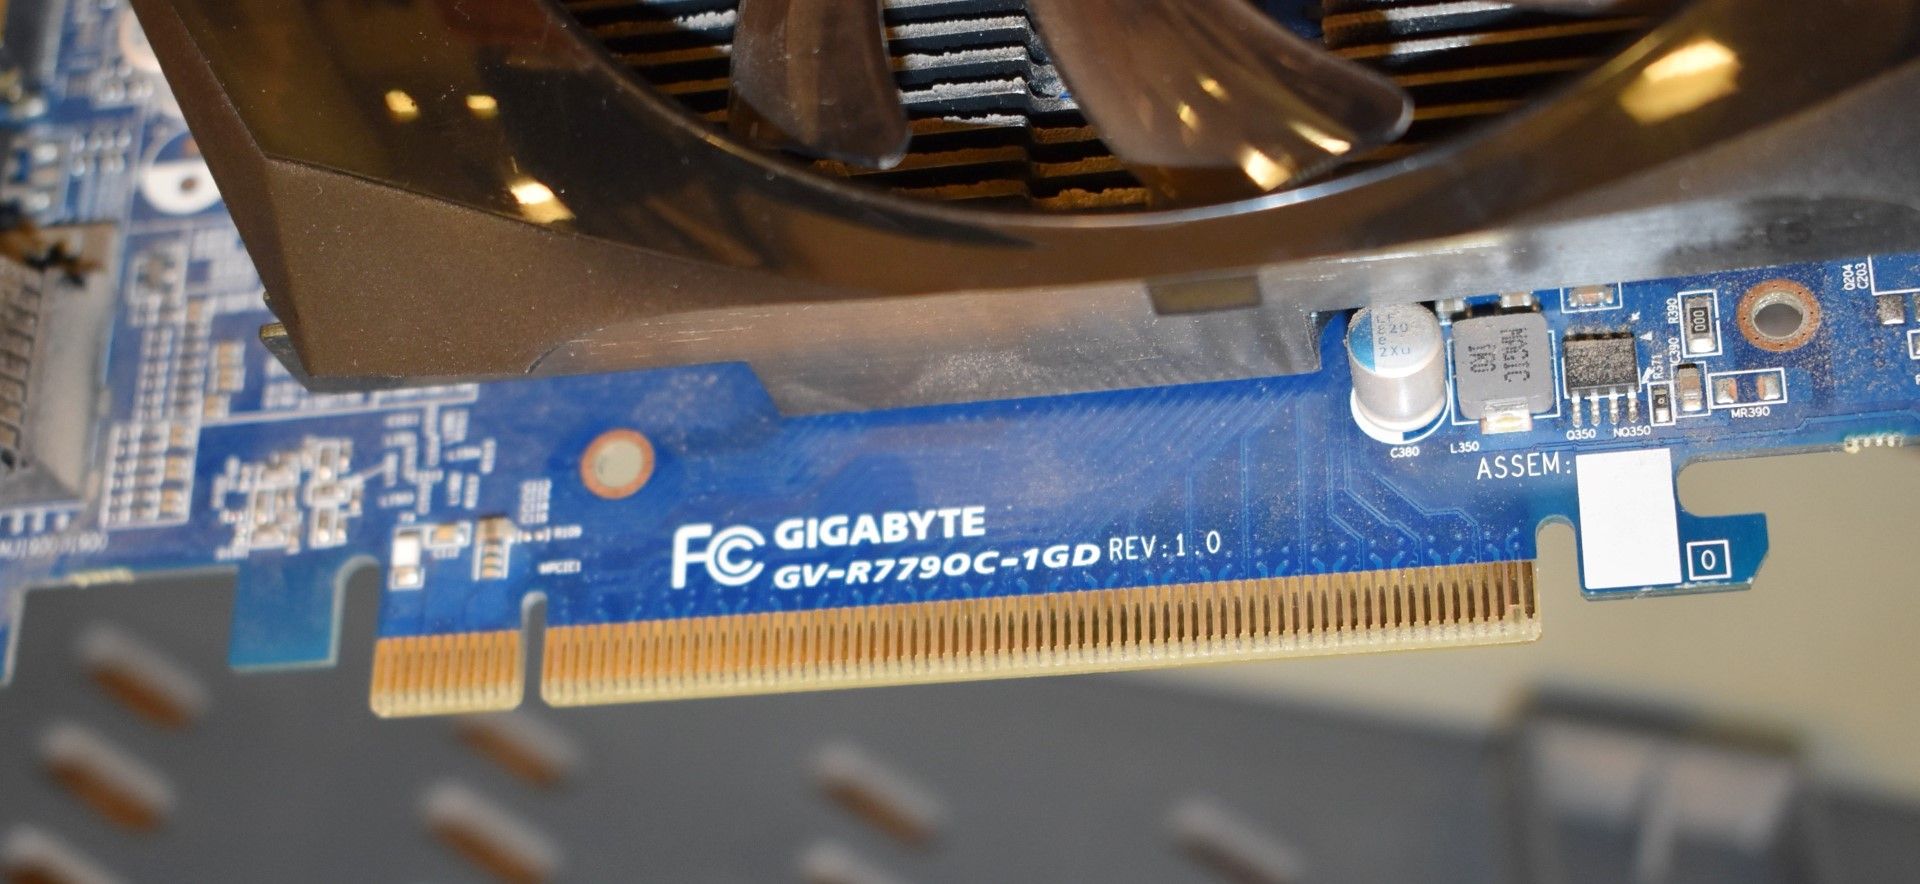 1 x Gigabyte Radeon HD7790 1GB Graphics Card - Previously Used For Testing Purposes - Ref: AC547 - Image 3 of 6